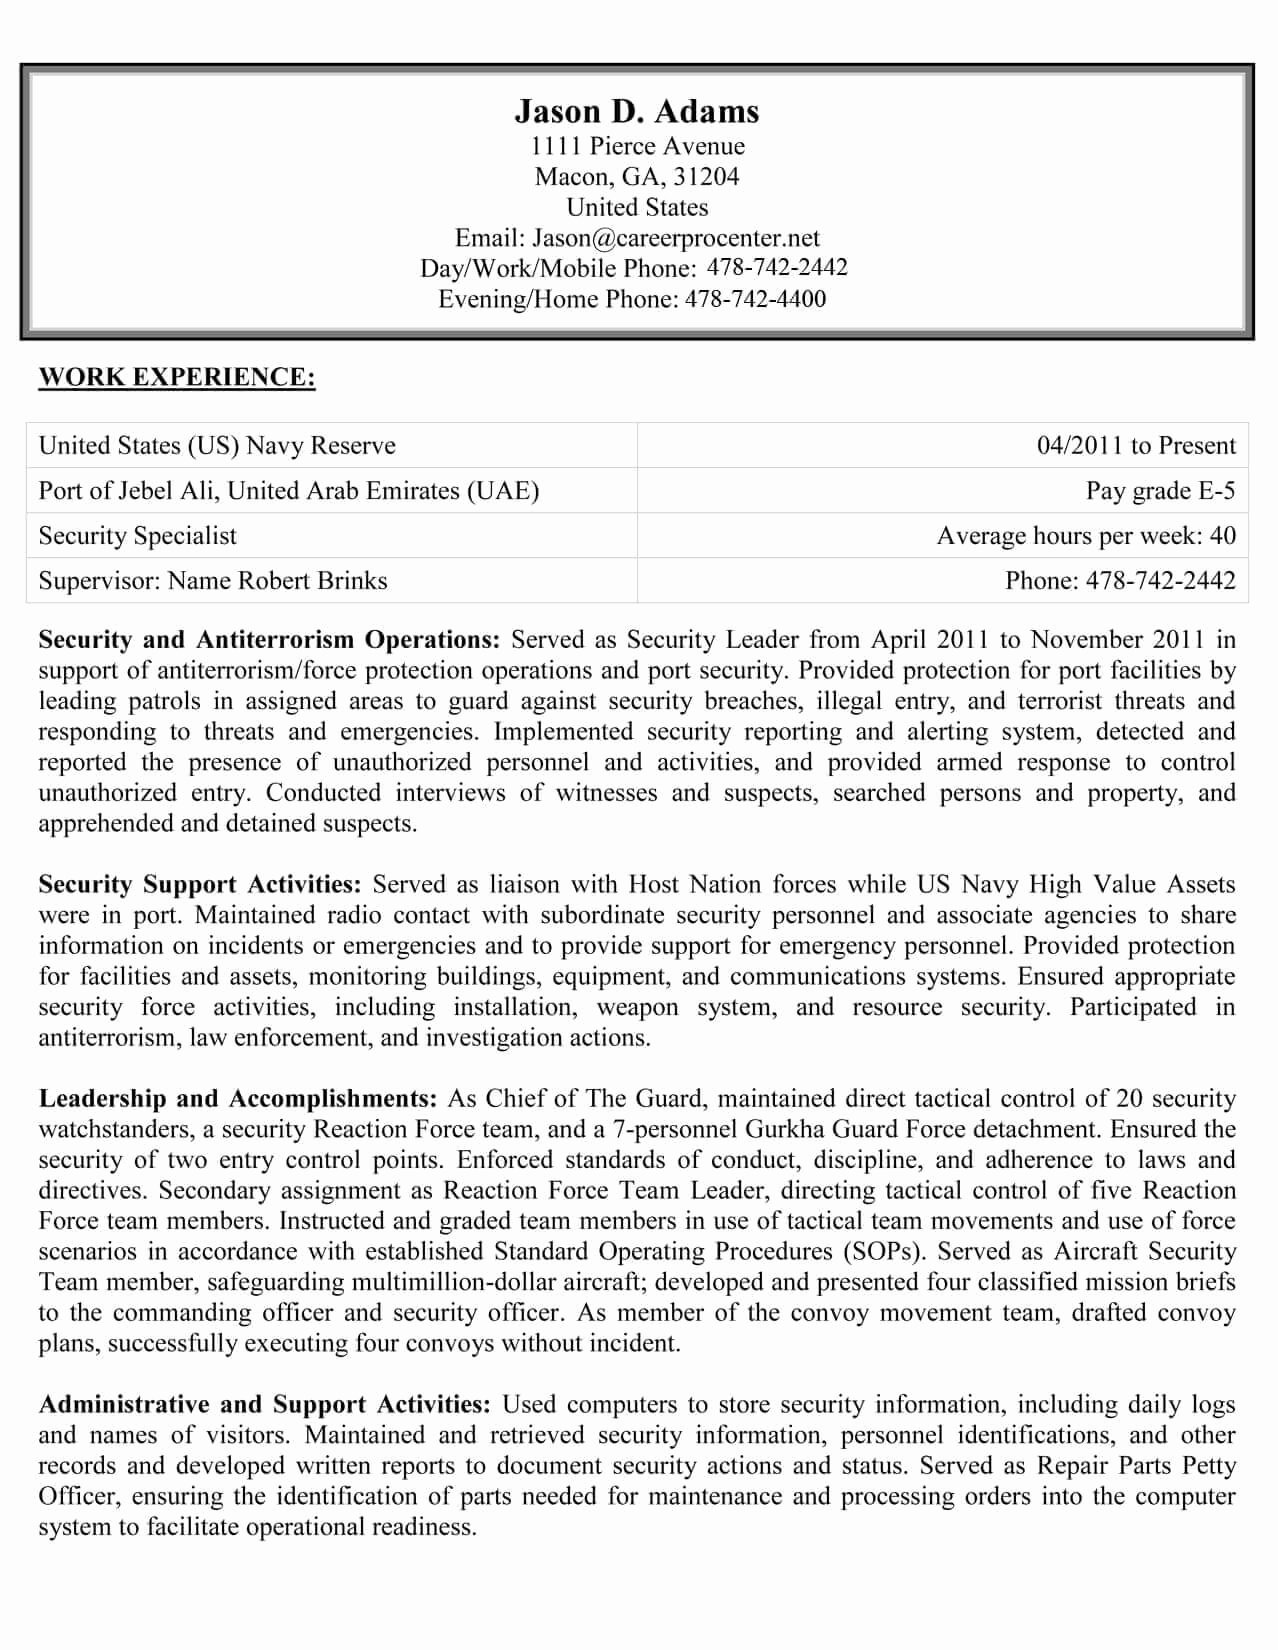 Sample Resume for Federal Jobs Unique Federal &amp; Usajobs Resume Examples